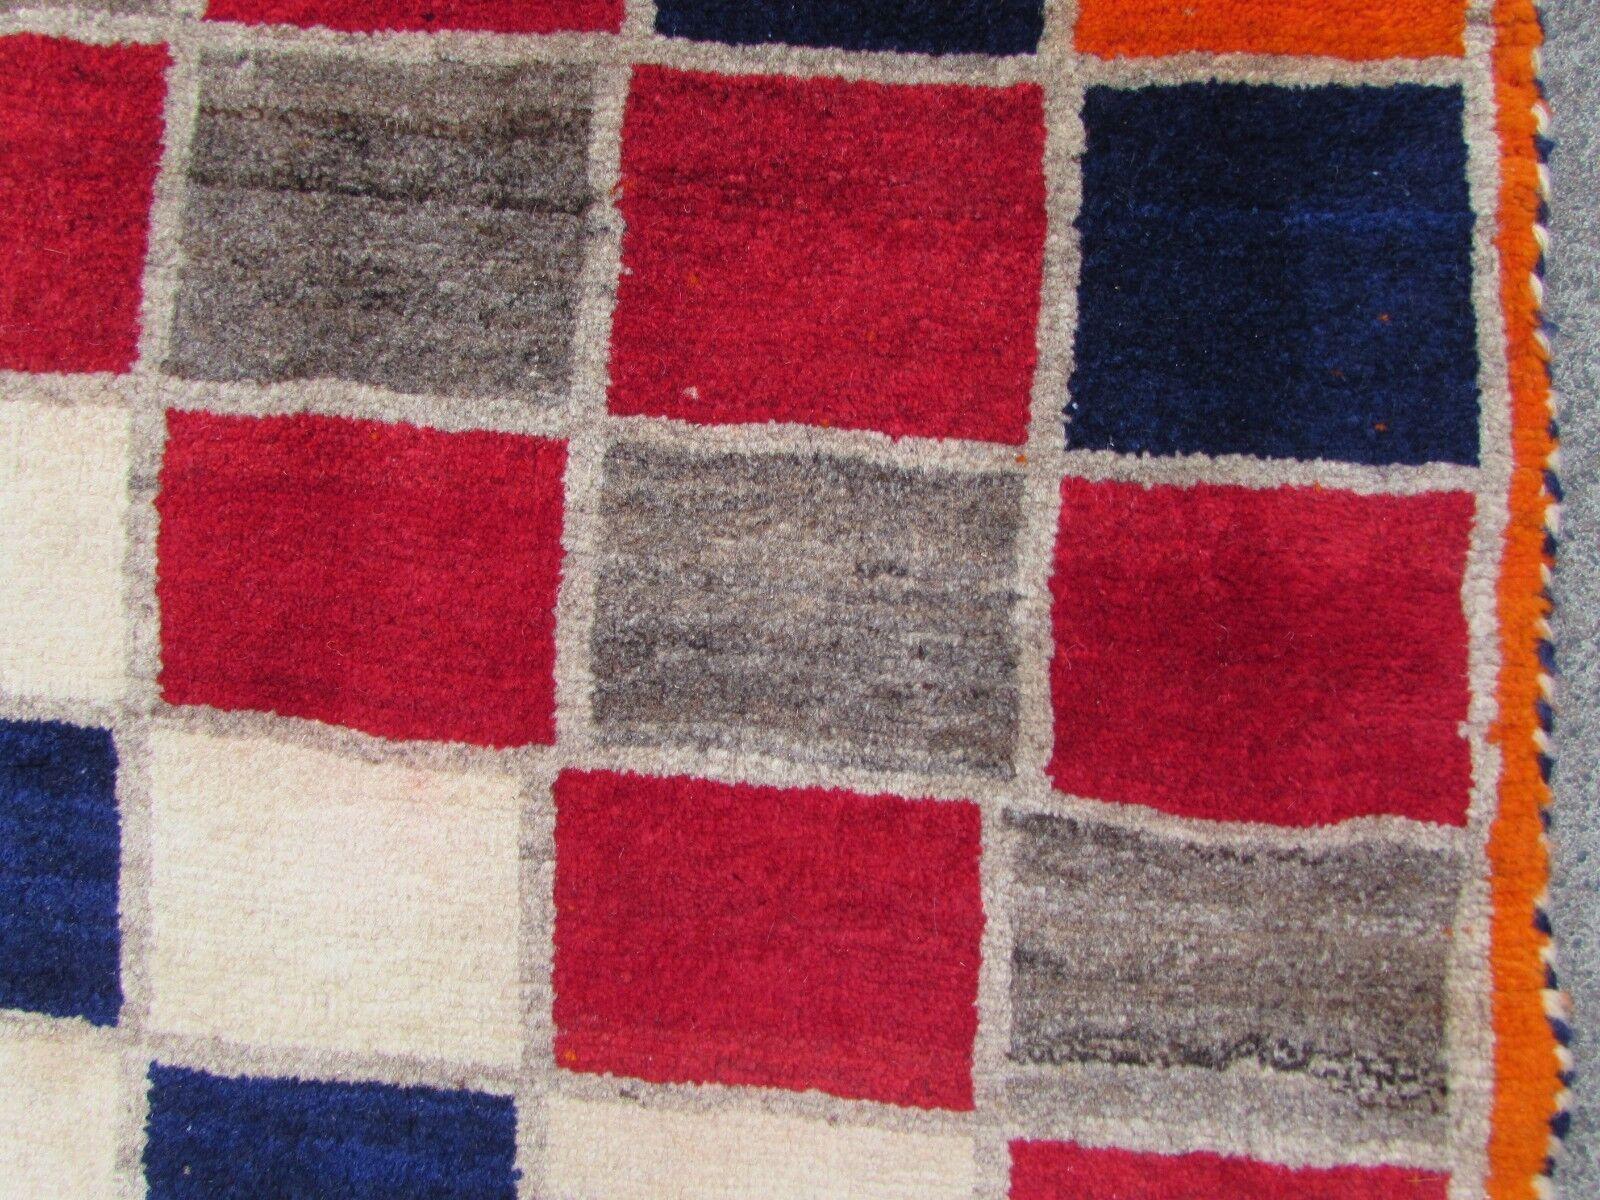 Late 20th Century Handmade Vintage Persian Style Gabbeh Rug 3.4' x 5.9', 1970s, 1Q44 For Sale